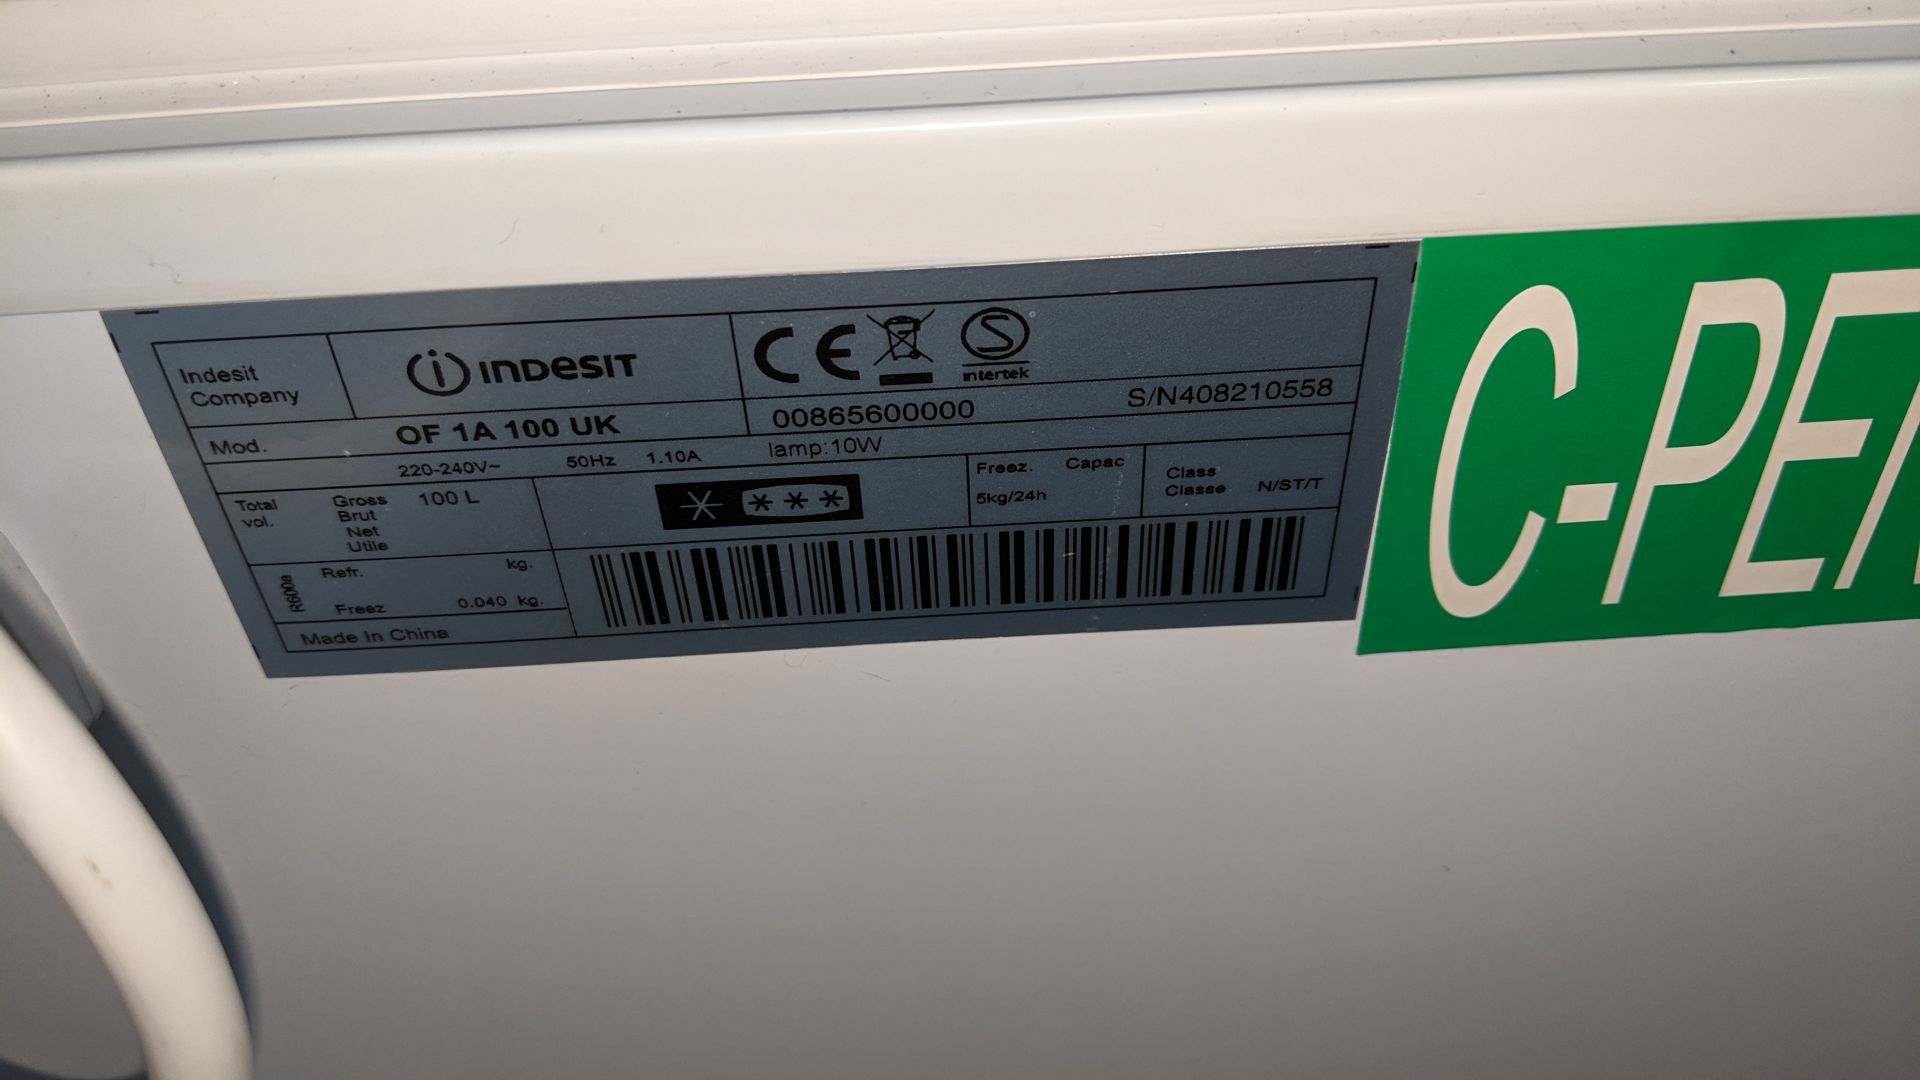 Indesit chest freezer OFIA100UK. This is one of a large number of lots used/owned by One To One ( - Image 5 of 5